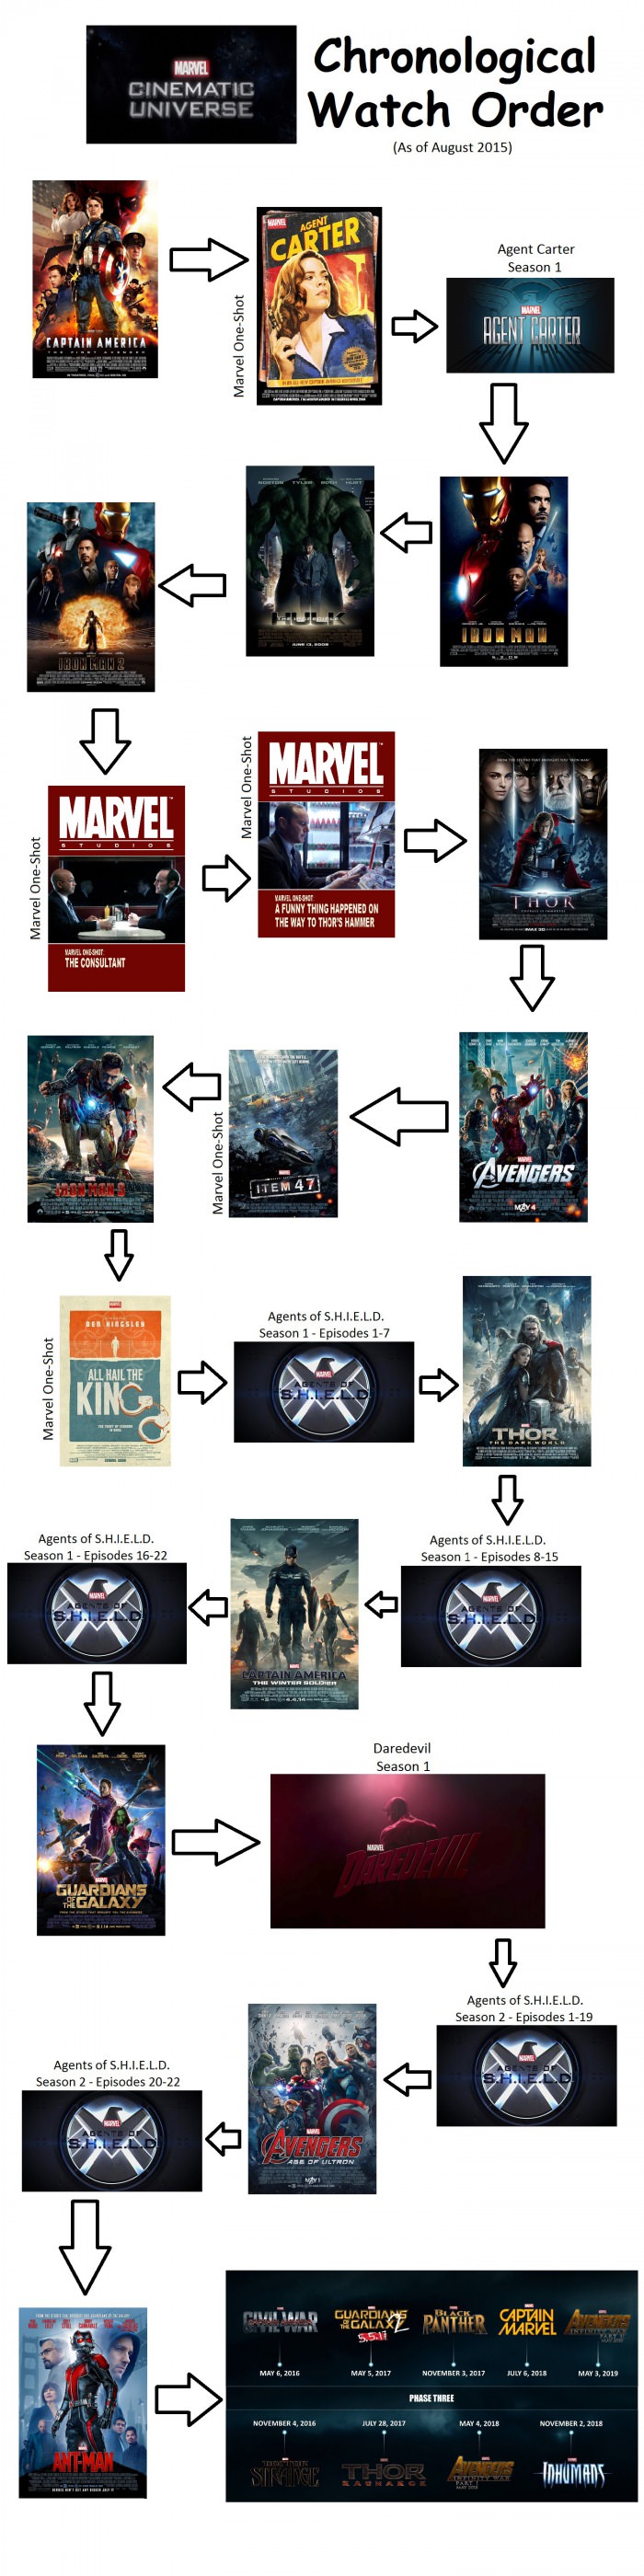 Marvel Cinematic Universe Chronological Watch Order